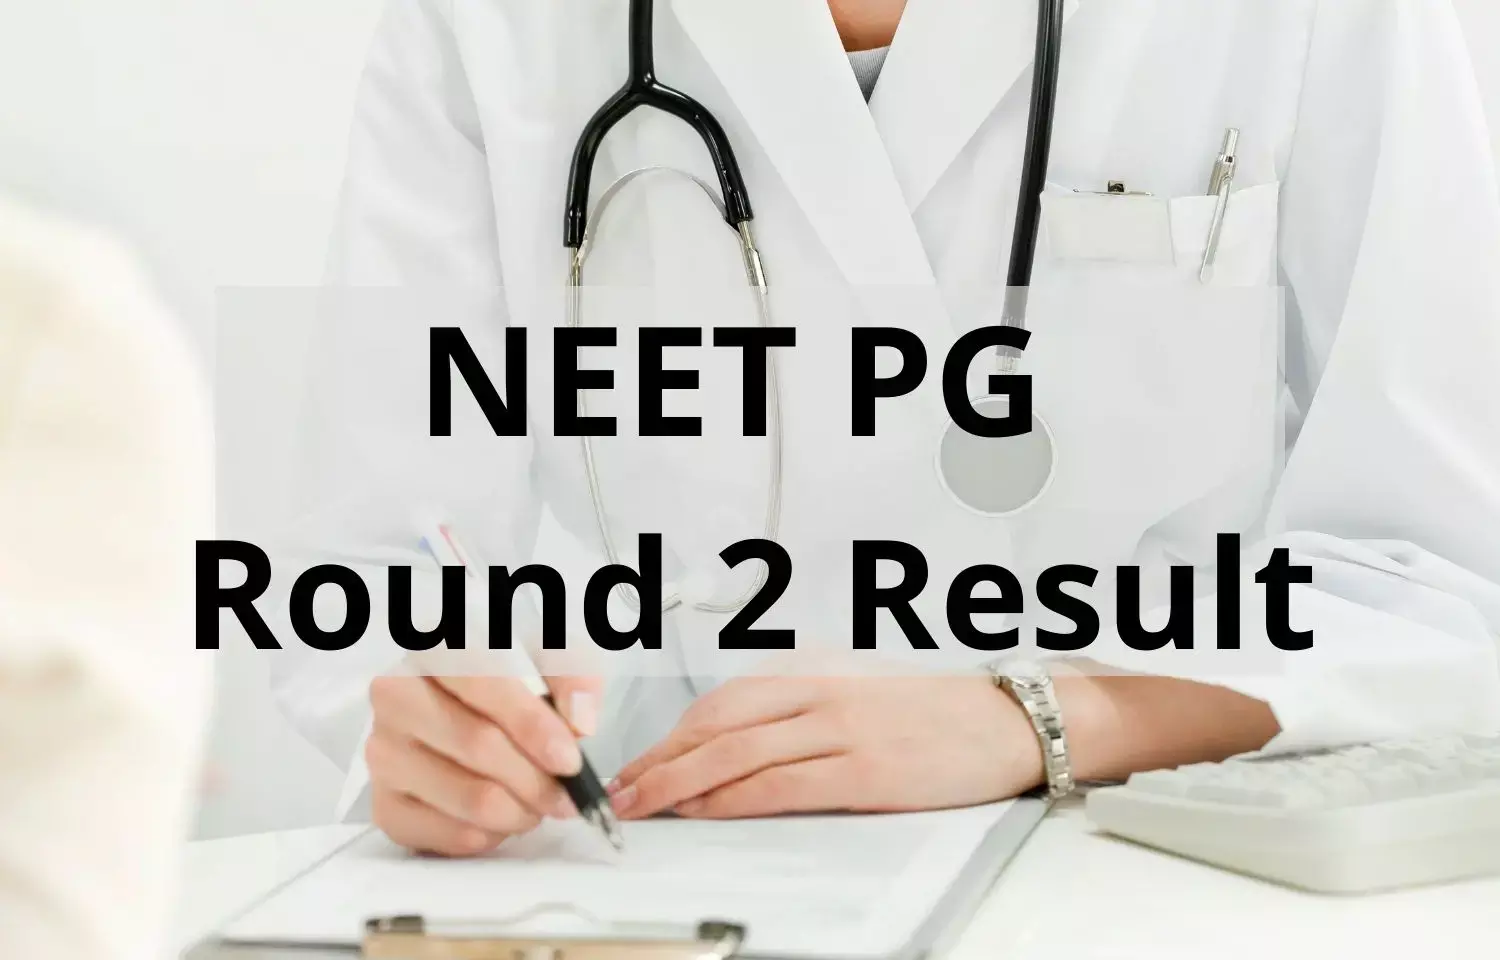 NEET PG Counselling 2023: MCC releases Round 2 final results, notifies on reporting, resignation, upgradation process, details here